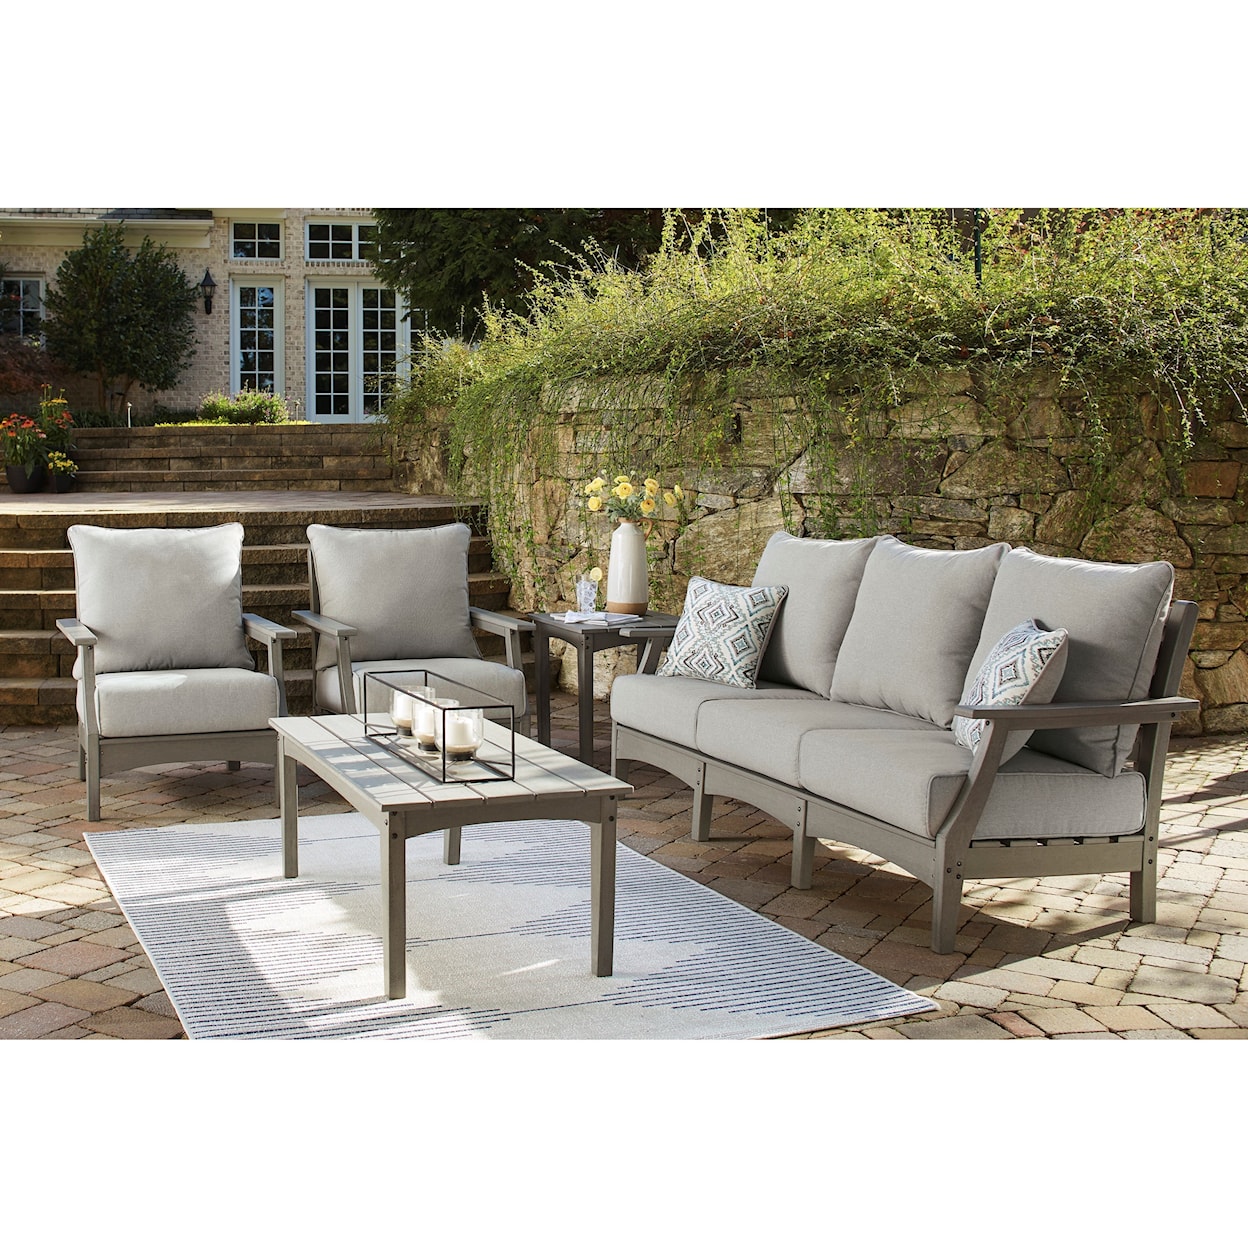 Signature Design by Ashley Visola Outdoor Sofa, 2 Chairs, and Table Set